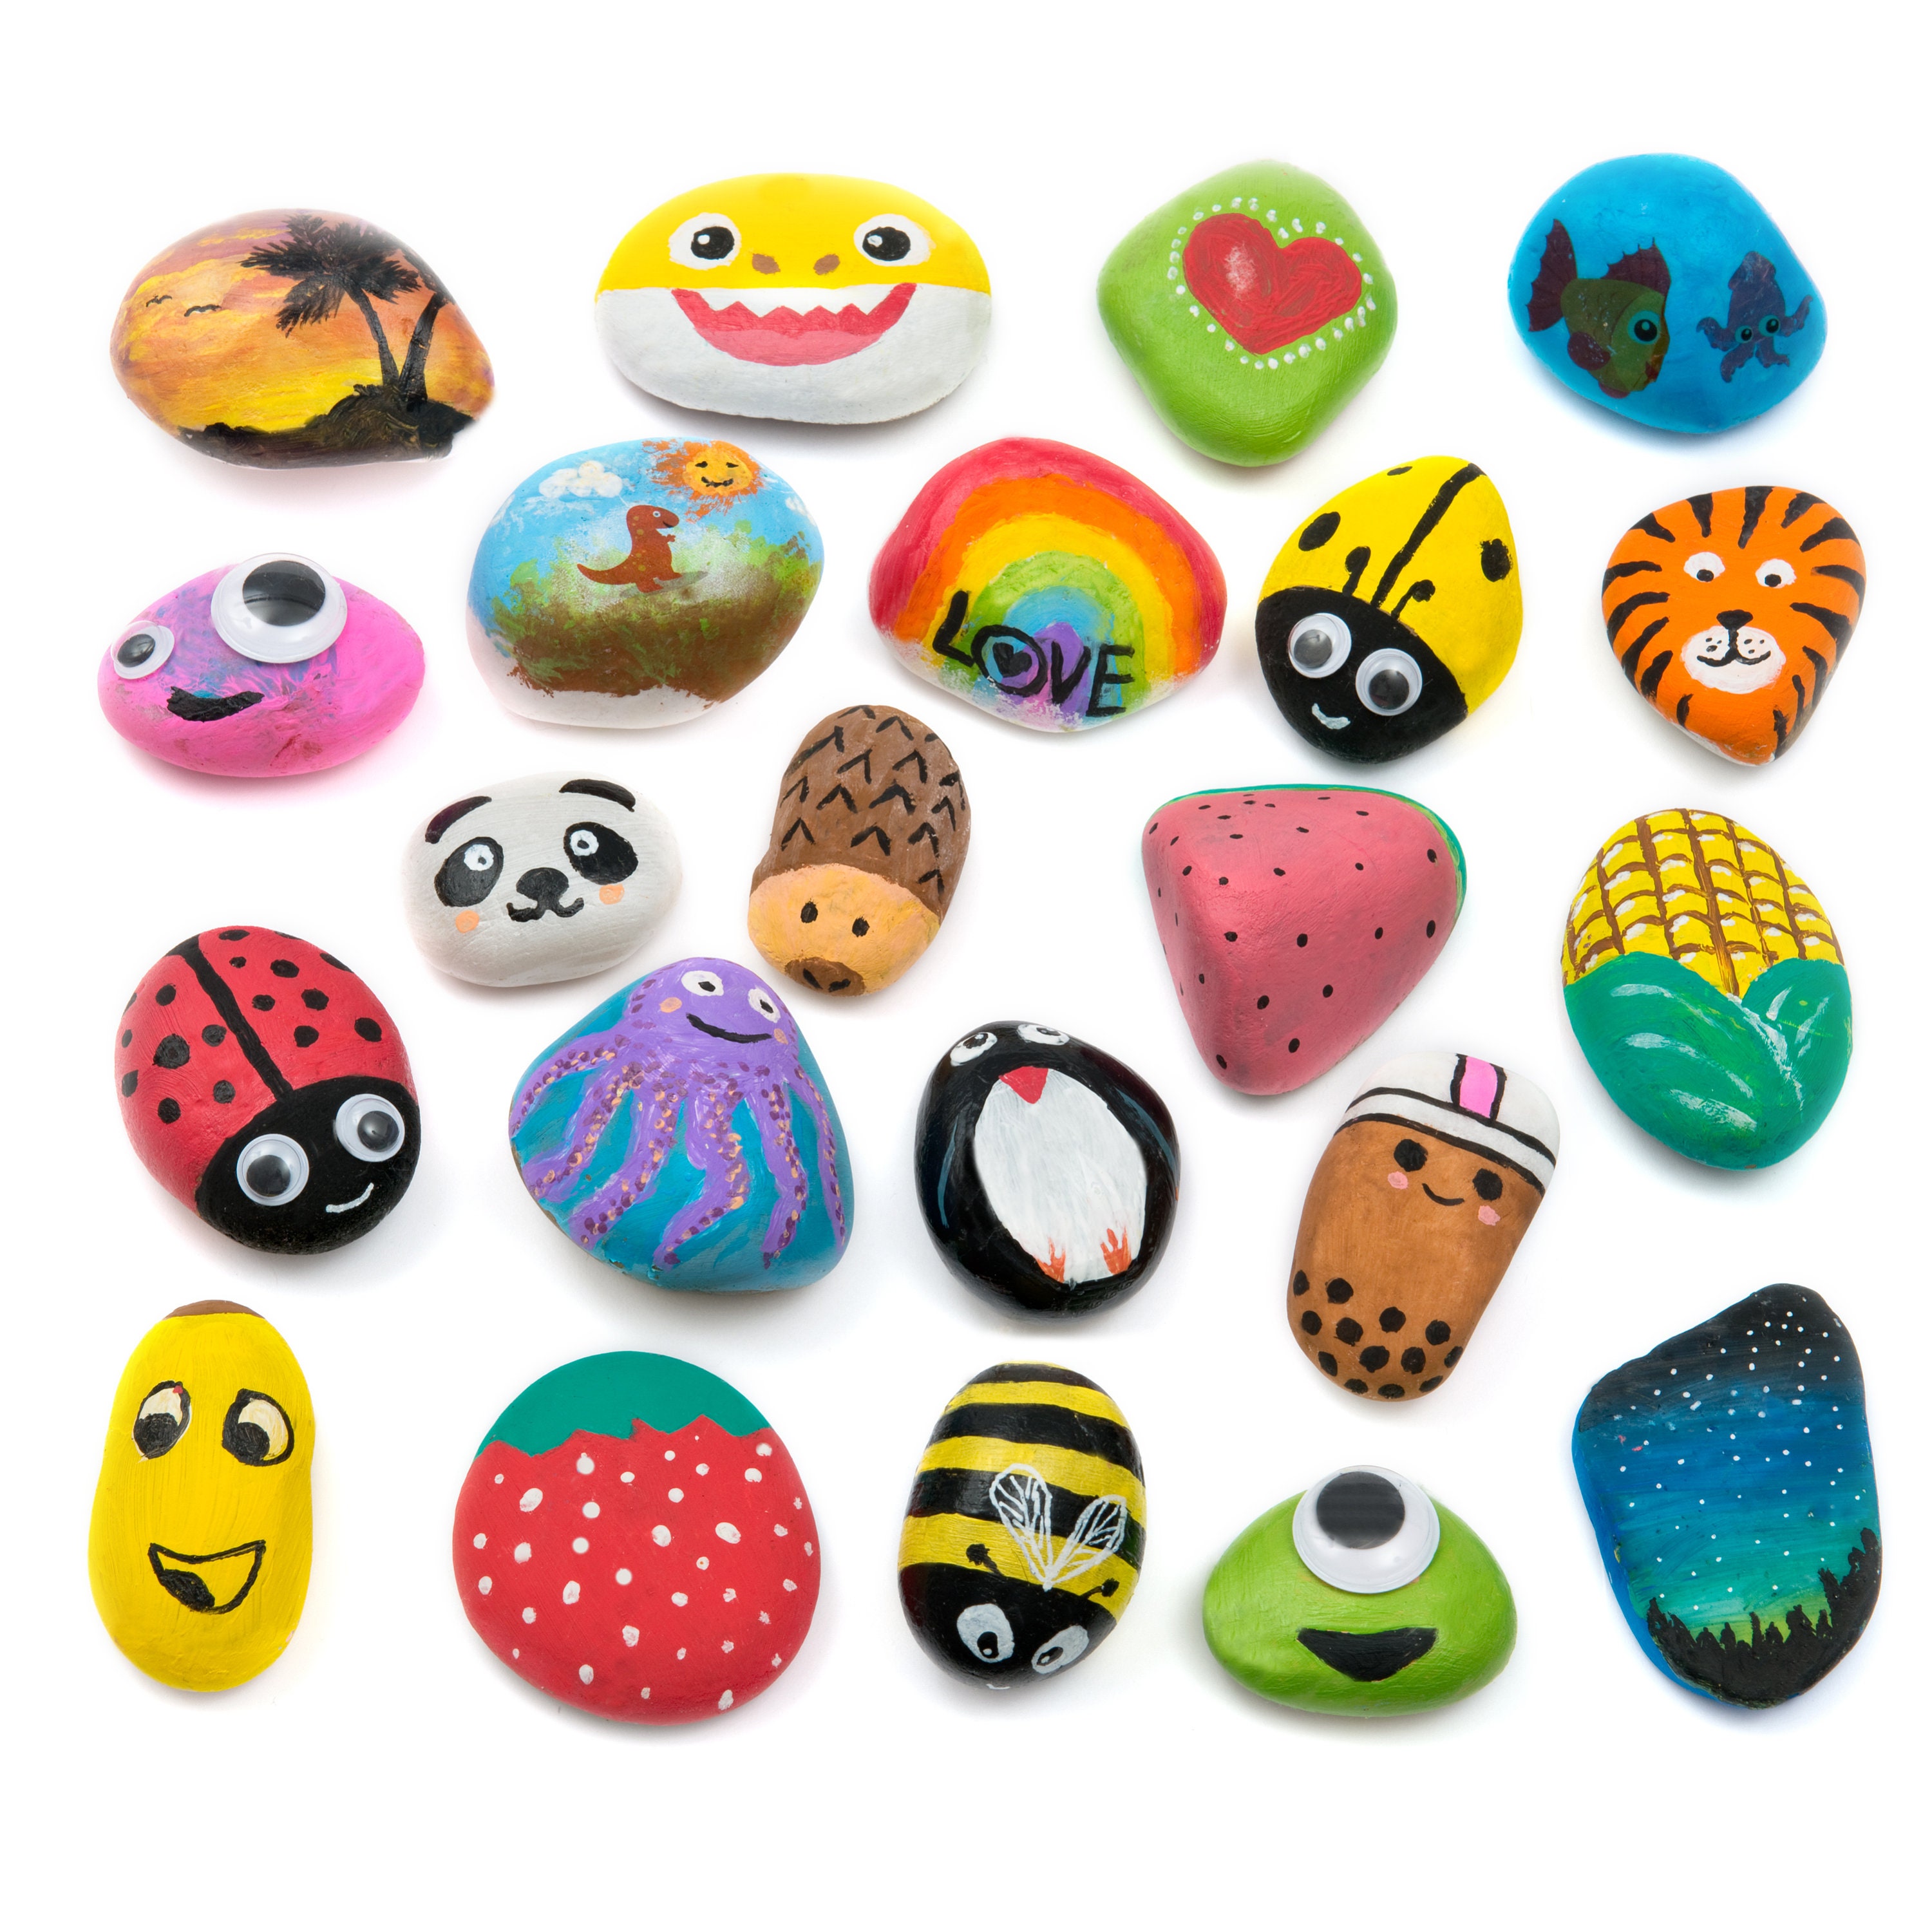 Dezzys Workshop Rock Painting Kit for Kids - Arts & Crafts Supplies Set for Girls & Boys Ages 6-12 - Educational Art Supplies for Painting Rocks, Fun